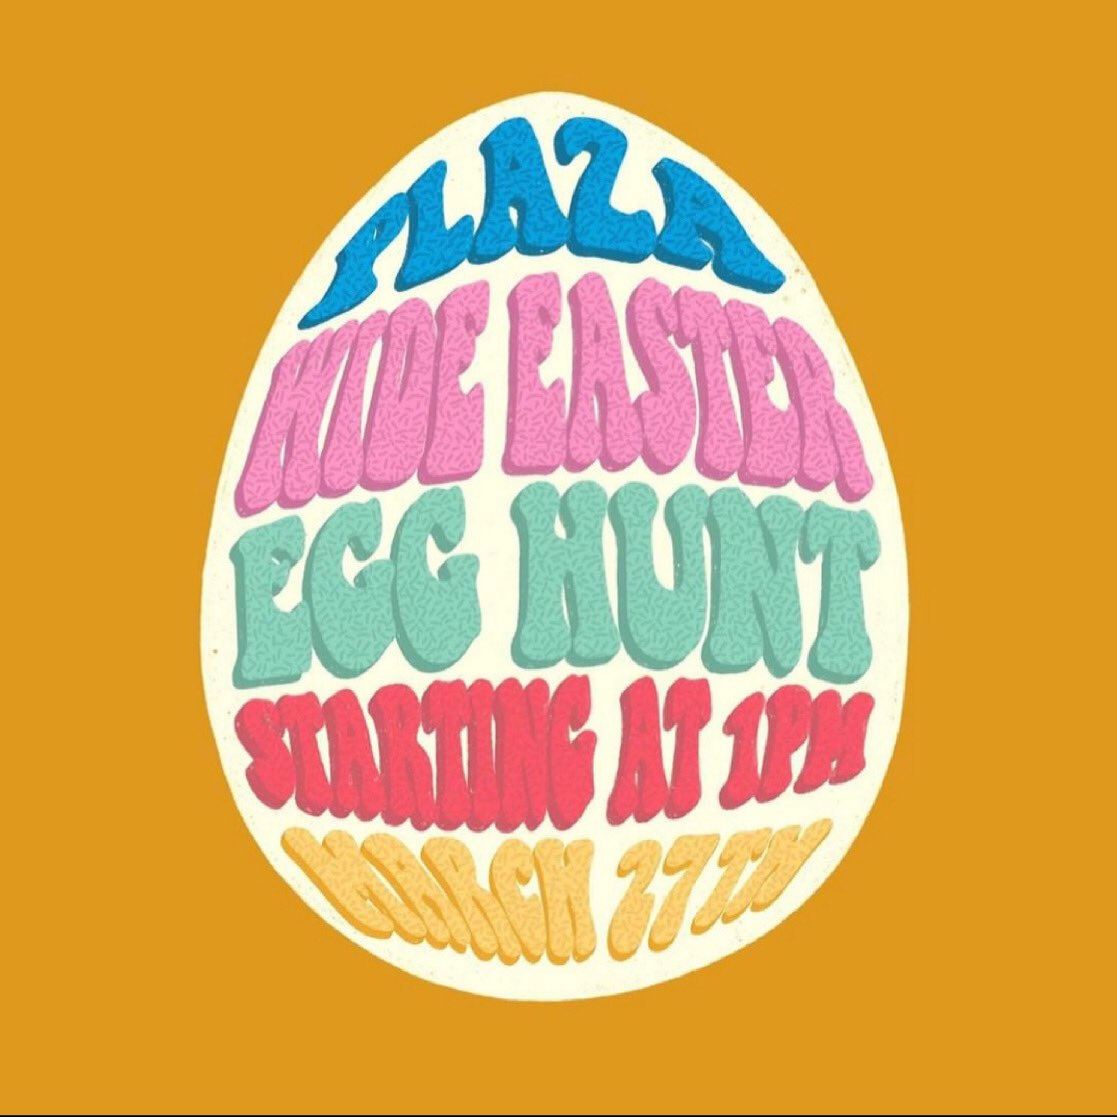 Plaza Wide Easter Egg Hunt 1:00 p.m. today!!!

*first come first served on finding the eggs.

#easteregghunt #exploreokc